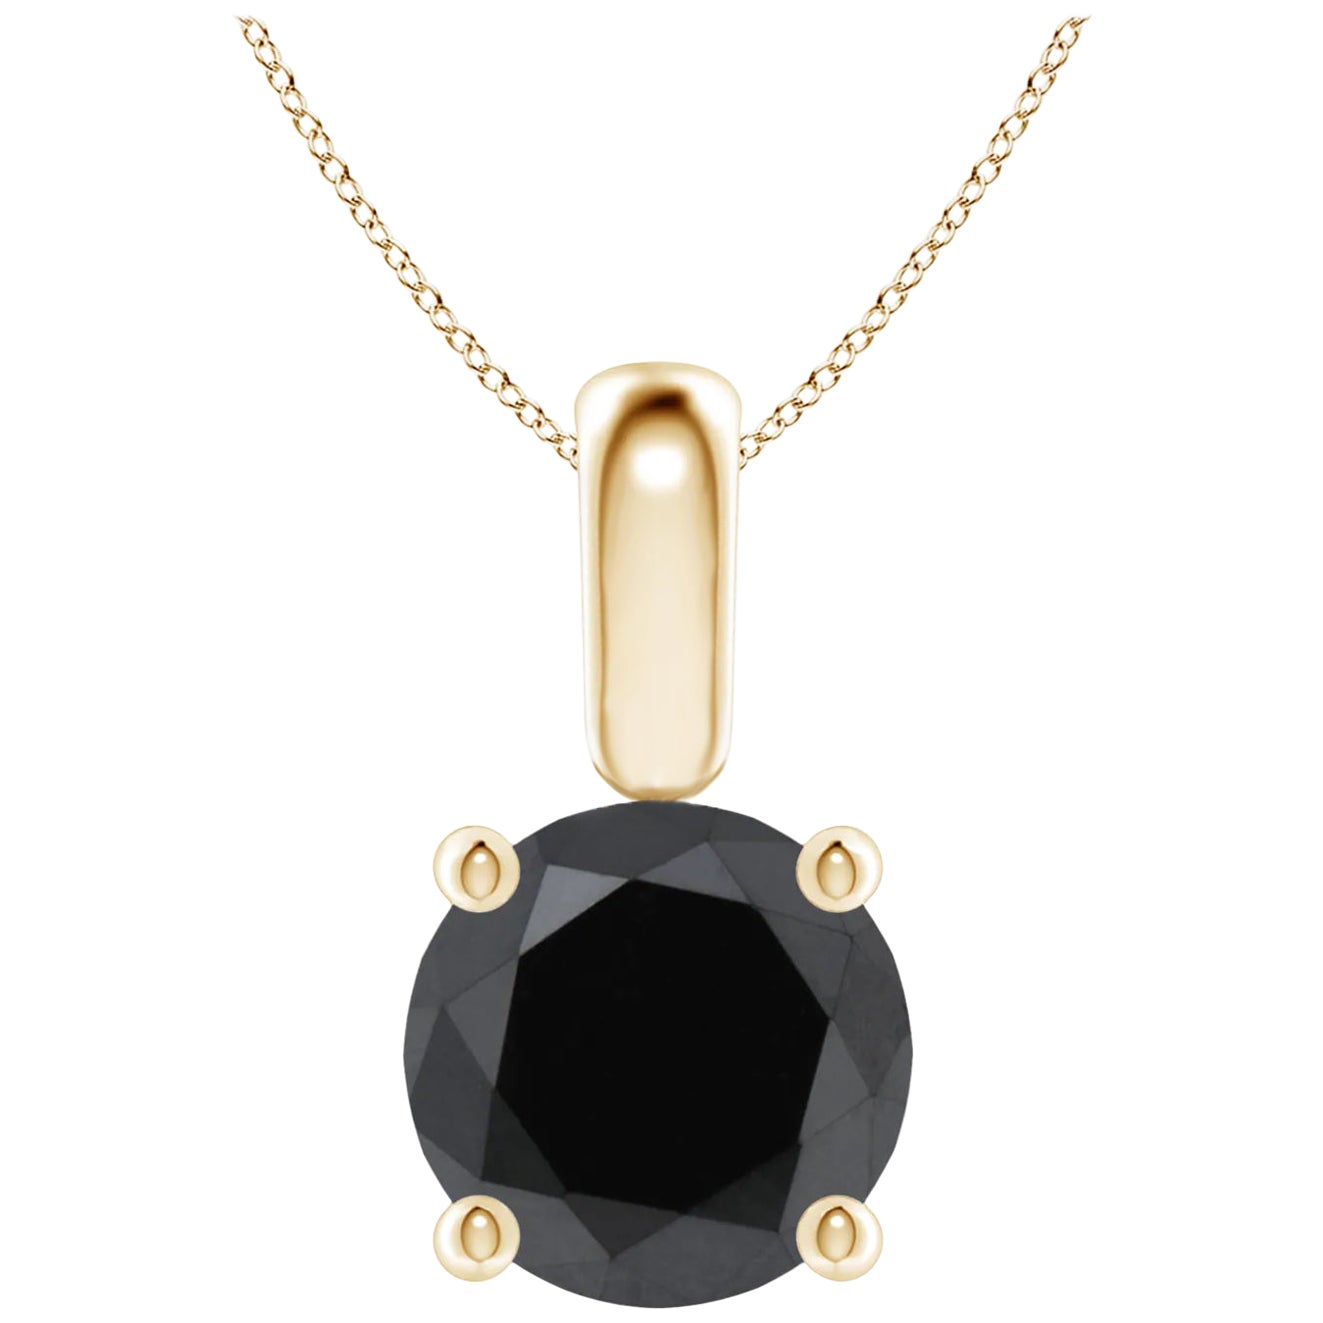 3.15 Carat Round Black Diamond Solitaire Pendant Necklace in 14K Yellow Gold